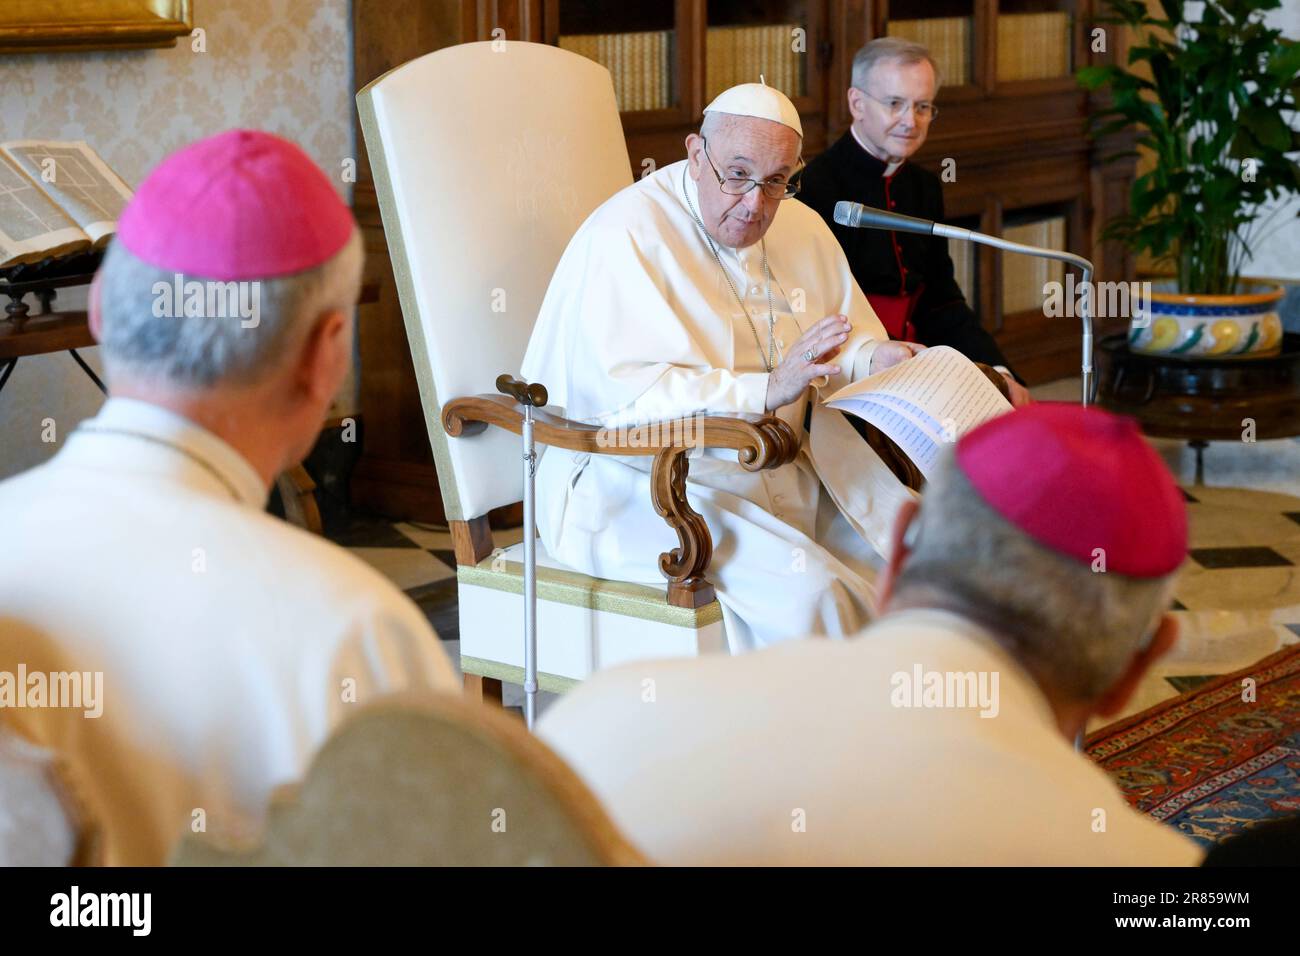 Vatican, Vatican. 29th May, 2023. Italy, Rome, Vatican, 2023-06-19 POPE FRANCIS RECEIVES CANONS REGULAR LATERANENSI IN PRIVATE AUDIENCE 2023-06-19 PAPA FRANCESCO RICEVE IN UDIENZA PRIVATA I CANONICI REGOLARI LATERANENSI Photograph by Vatican Media /Catholic Press Photo/IPA RESTRICTED TO EDITORIAL USE - NO MARKETING - NO ADVERTISING CAMPAIGNS Credit: Independent Photo Agency/Alamy Live News Stock Photo